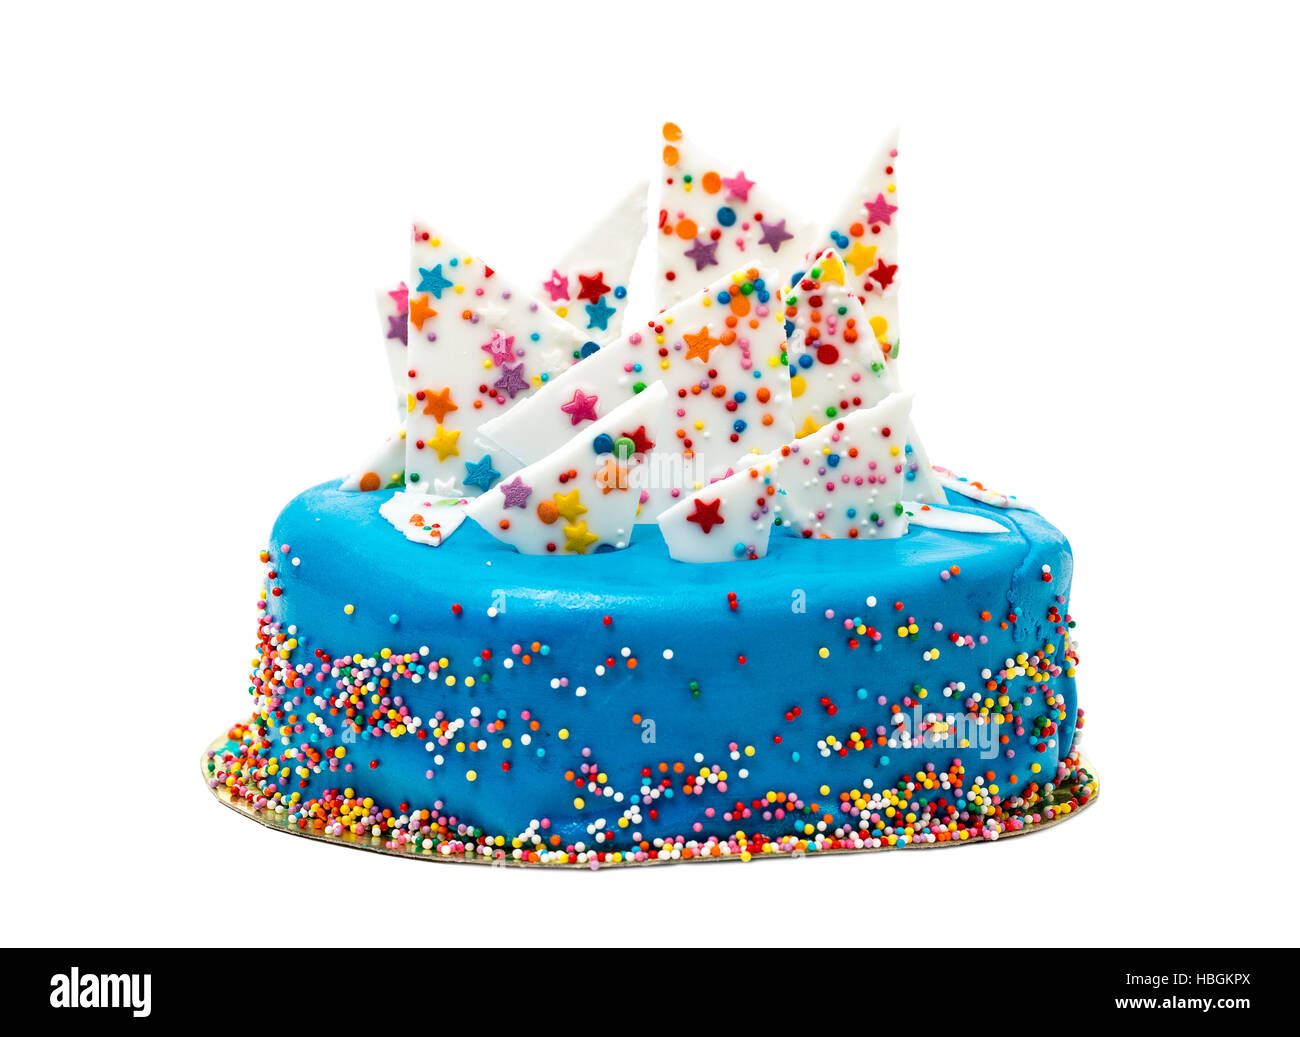 Birthday Blue Cake with Colorful Sprinkles Stock Photo